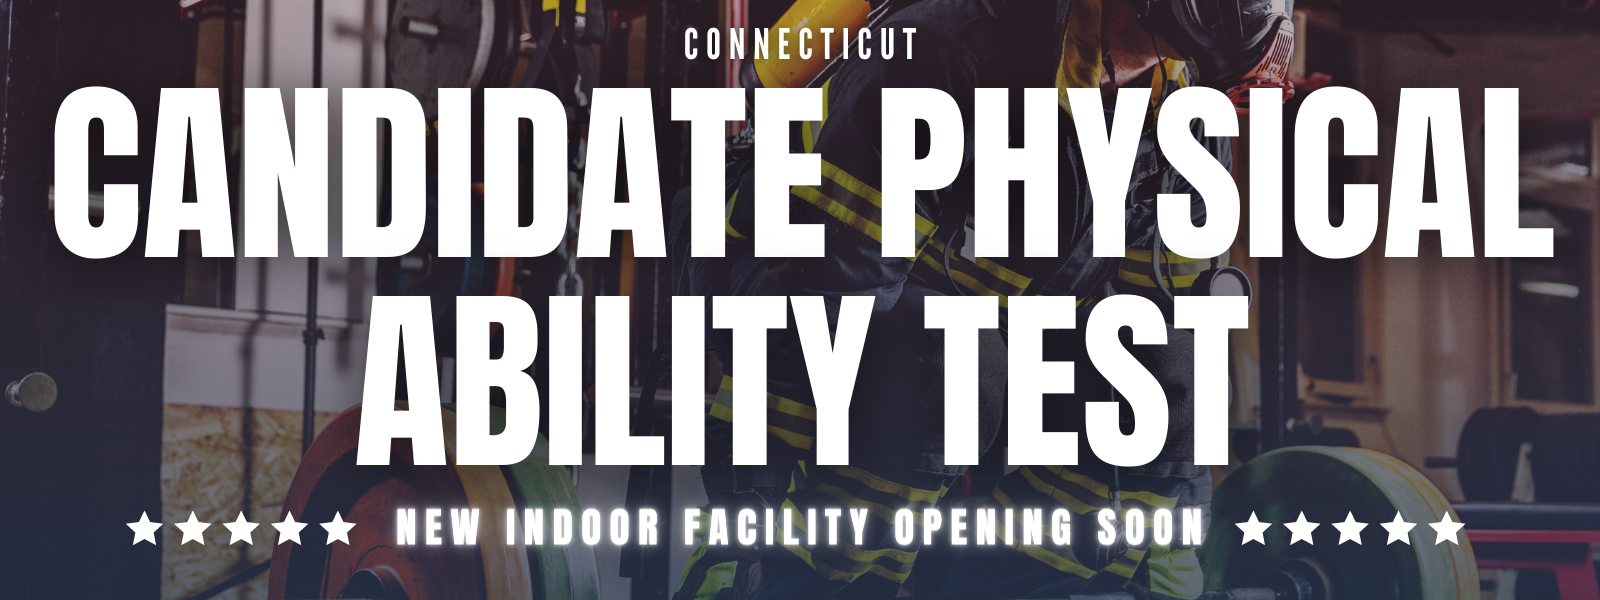 Candidate Physical Ability Test (CPAT) North Haven, CT Firefighter Jobs